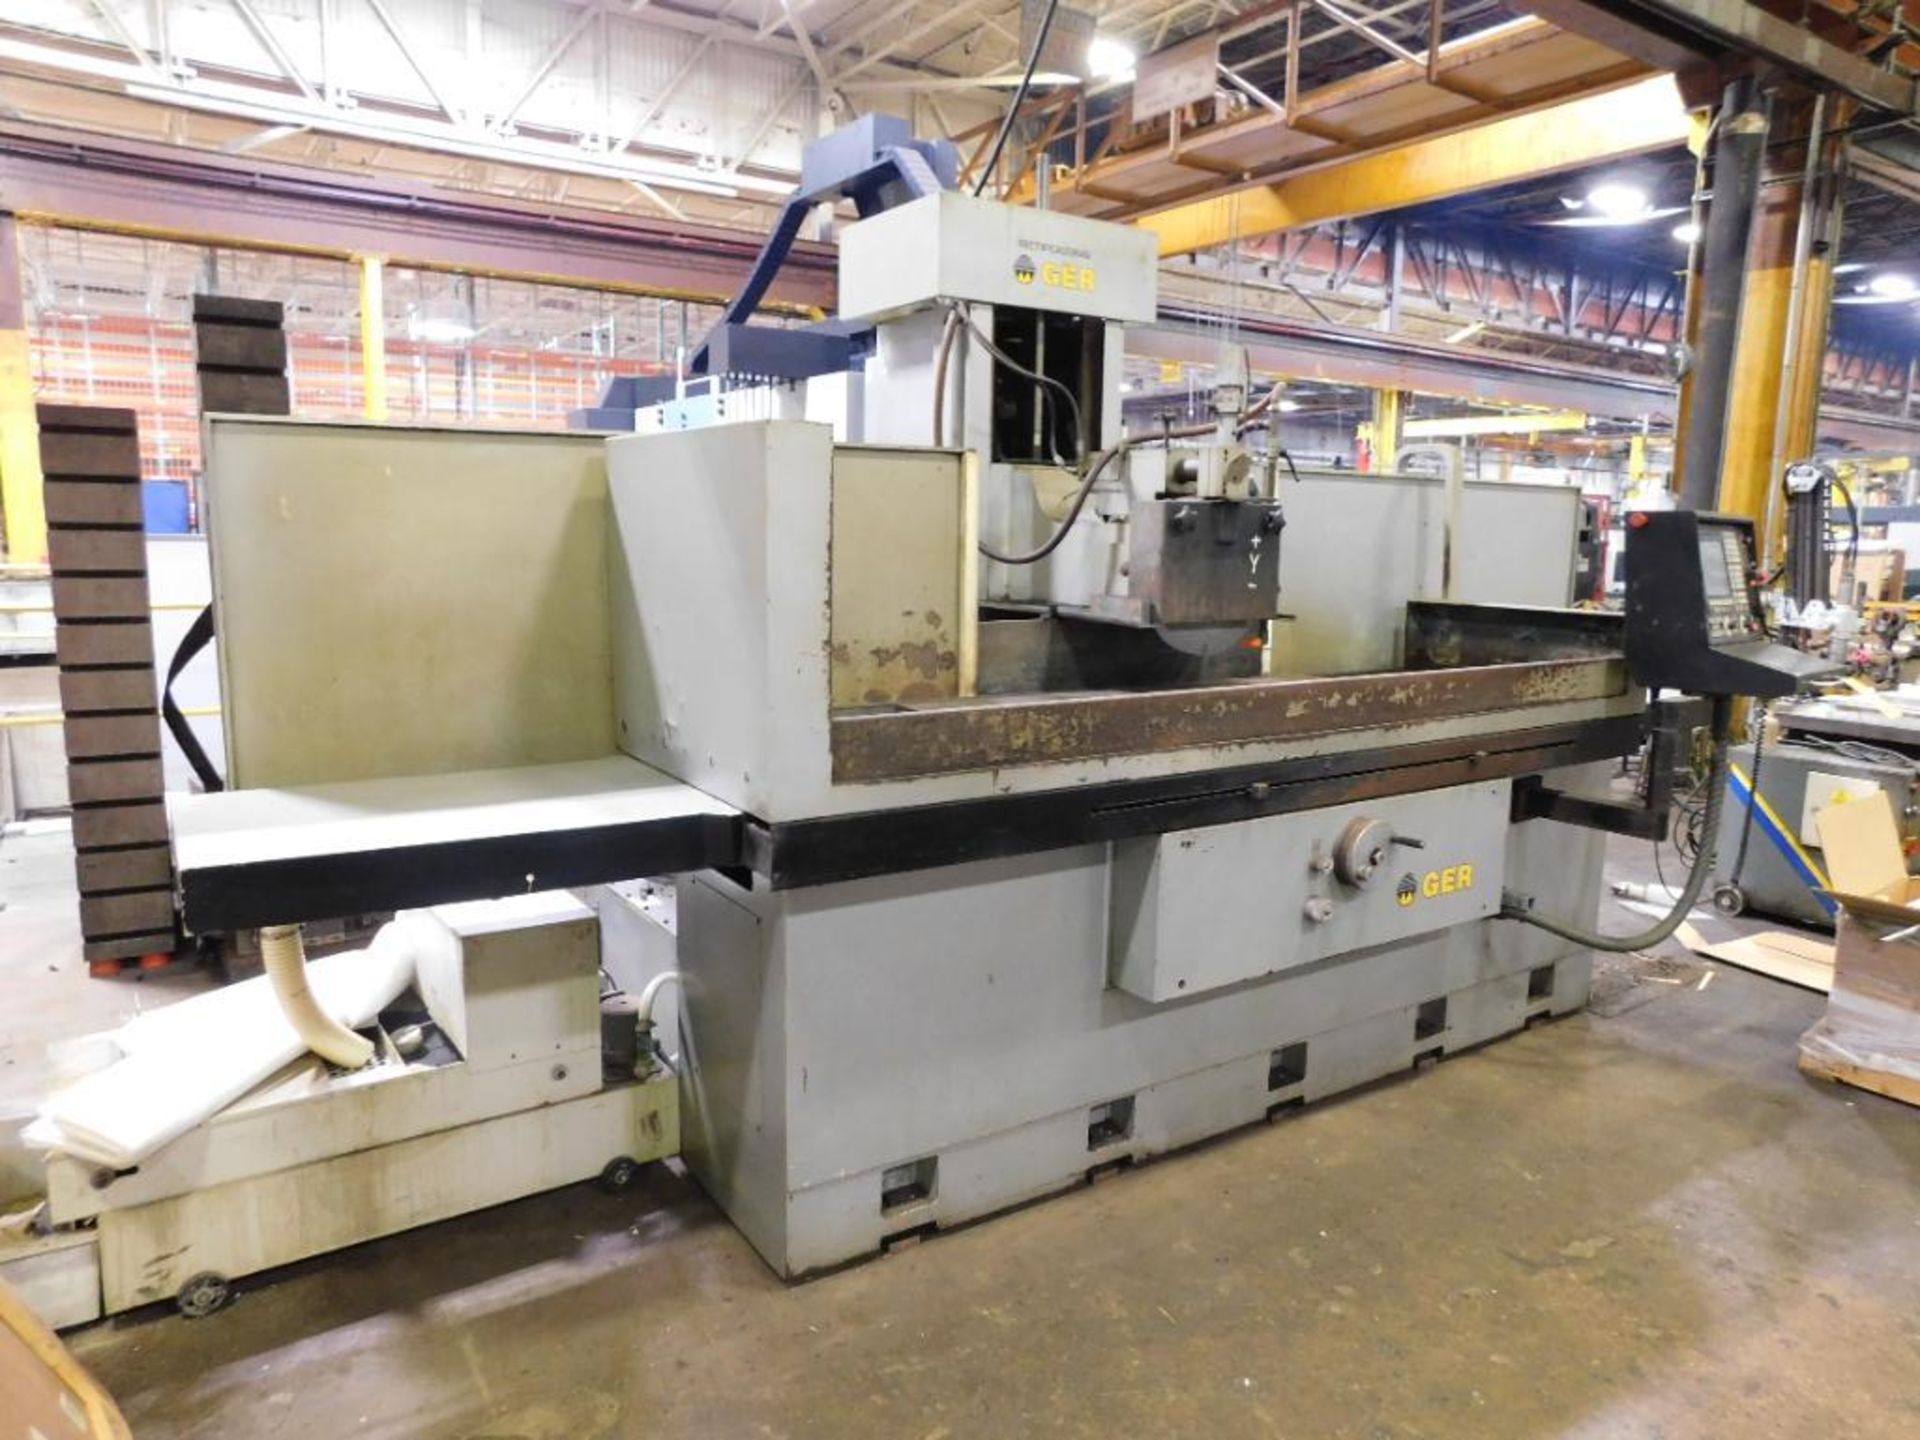 Ger Model RS-15/60 24" x 60" CNC Surface Grinder, S/N: 92/13-50 (1992) ((Unit # 594) w/3-Axis, Elect